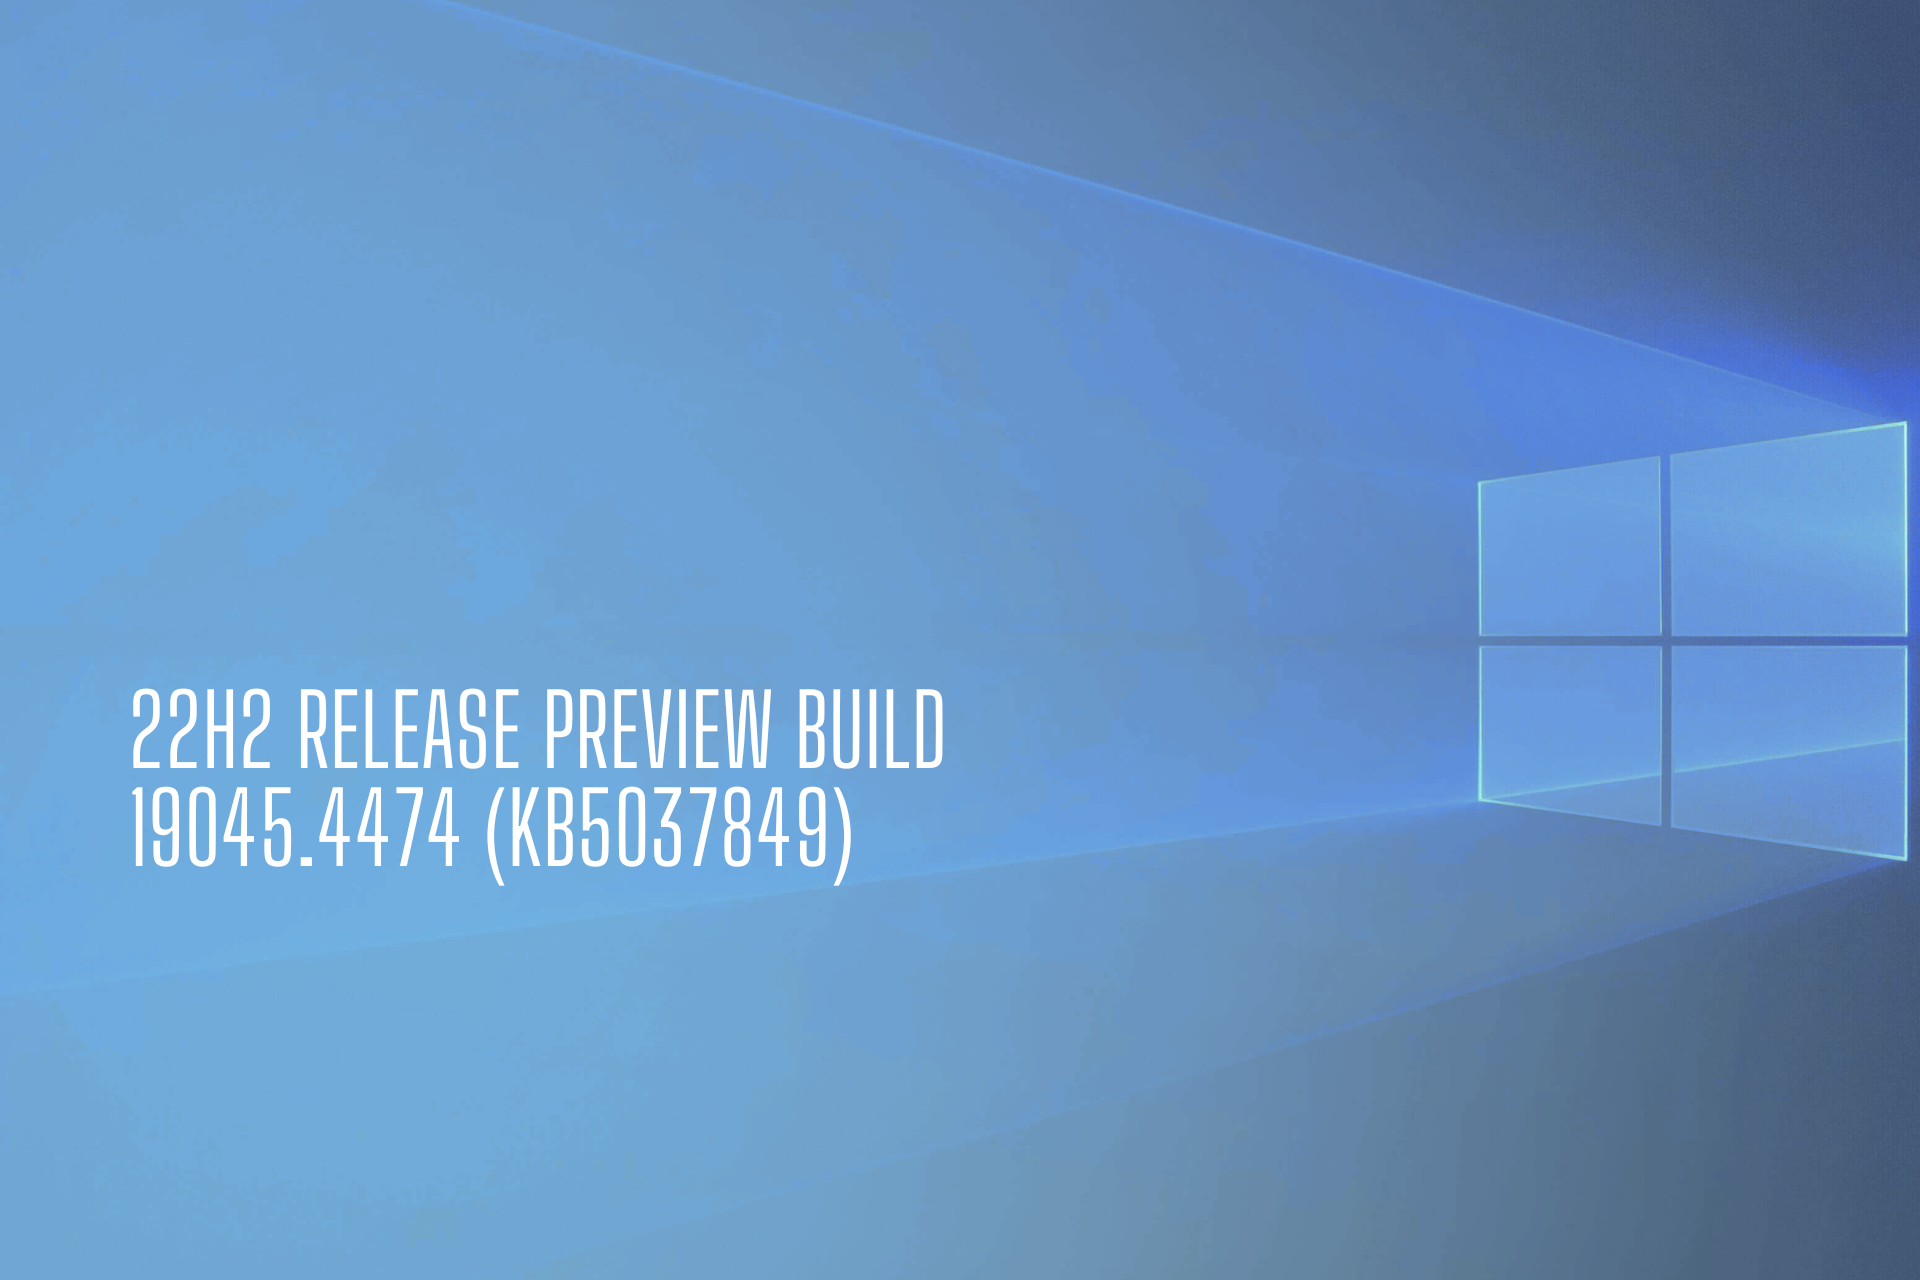 KB5037849 for Windows 10 brings fixes for the known issues